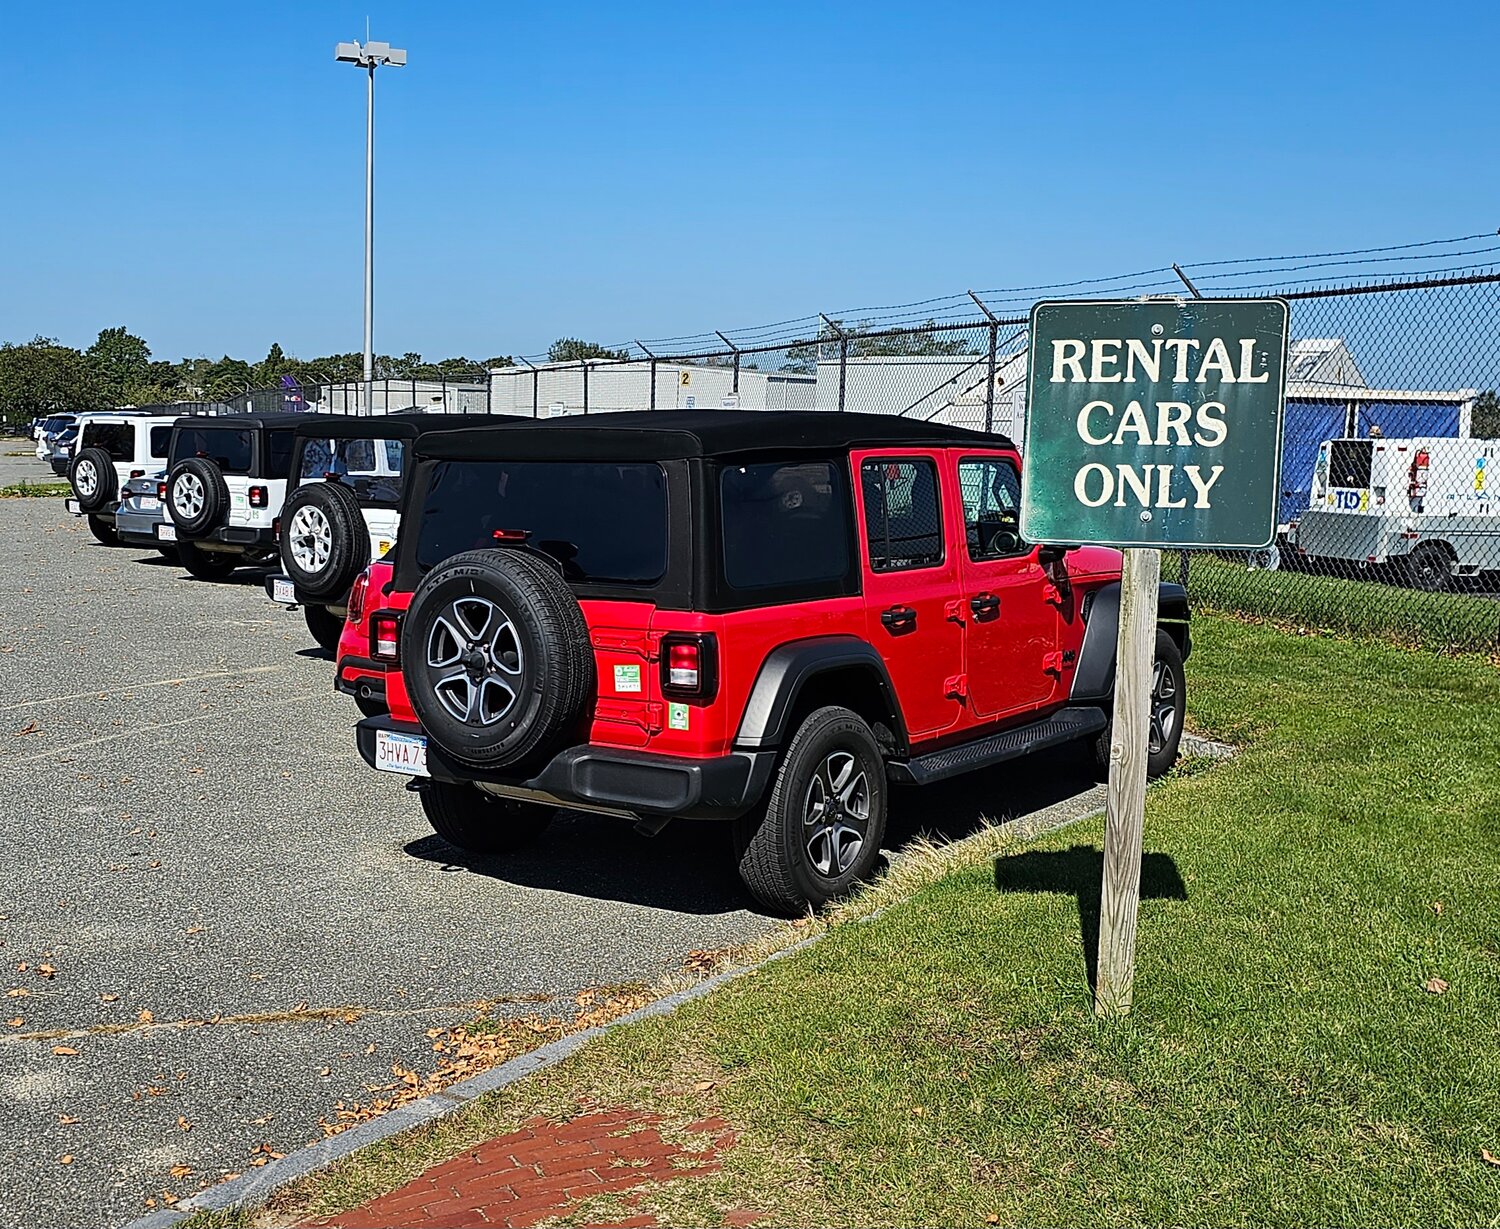 A line of rental Jeeps in the Nantucket Memorial Airport parking lot.